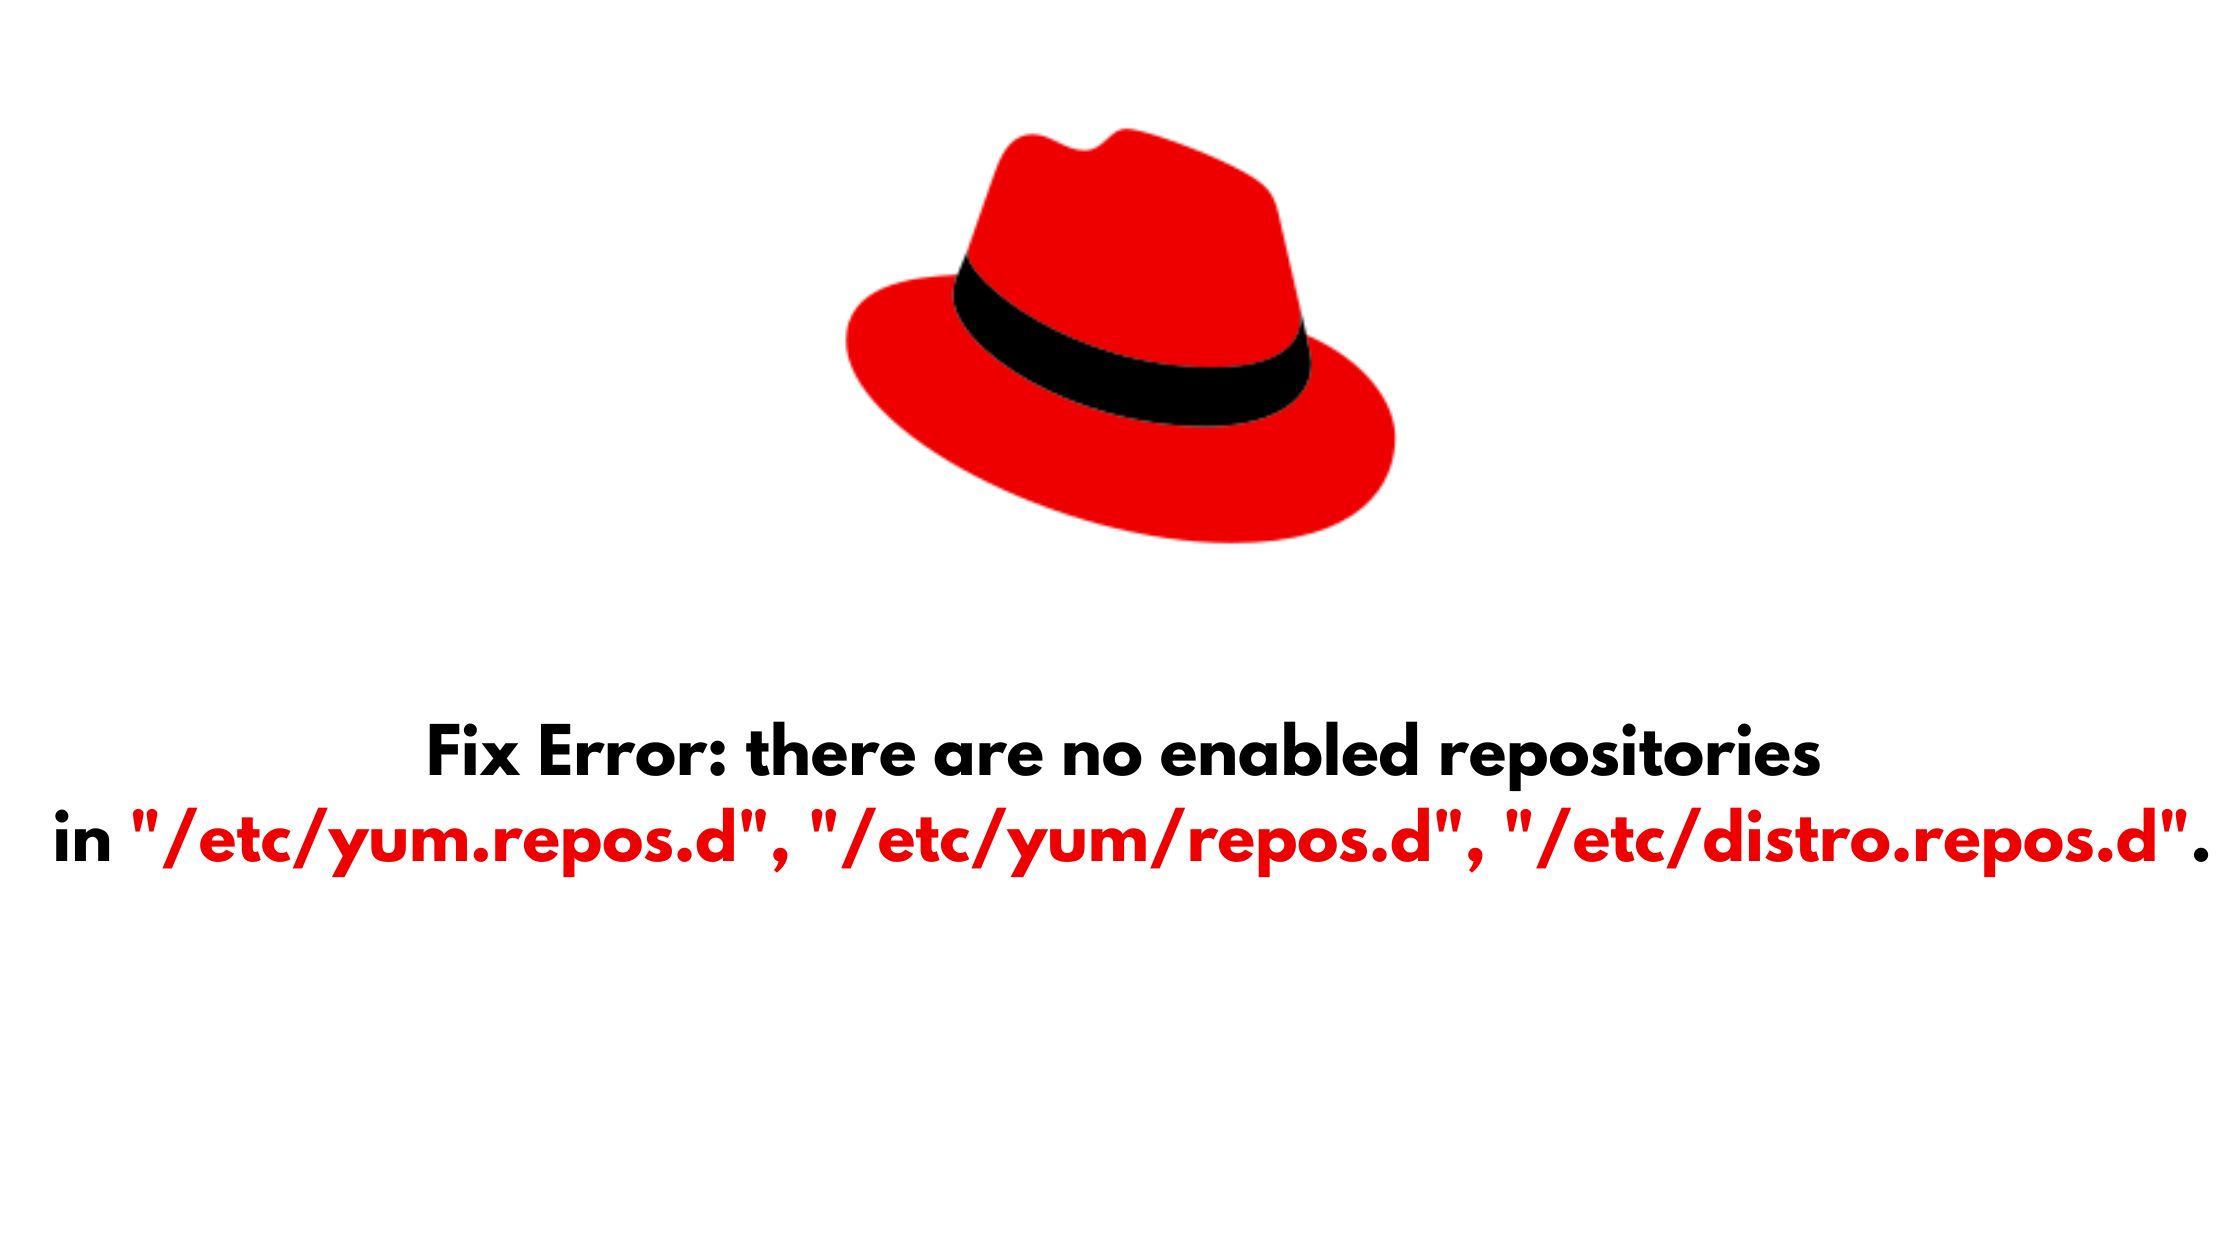 Fix Error: there are no enabled repositories in "/etc/yum.repos.d", "/etc/yum/repos.d", "/etc/distro.repos.d".